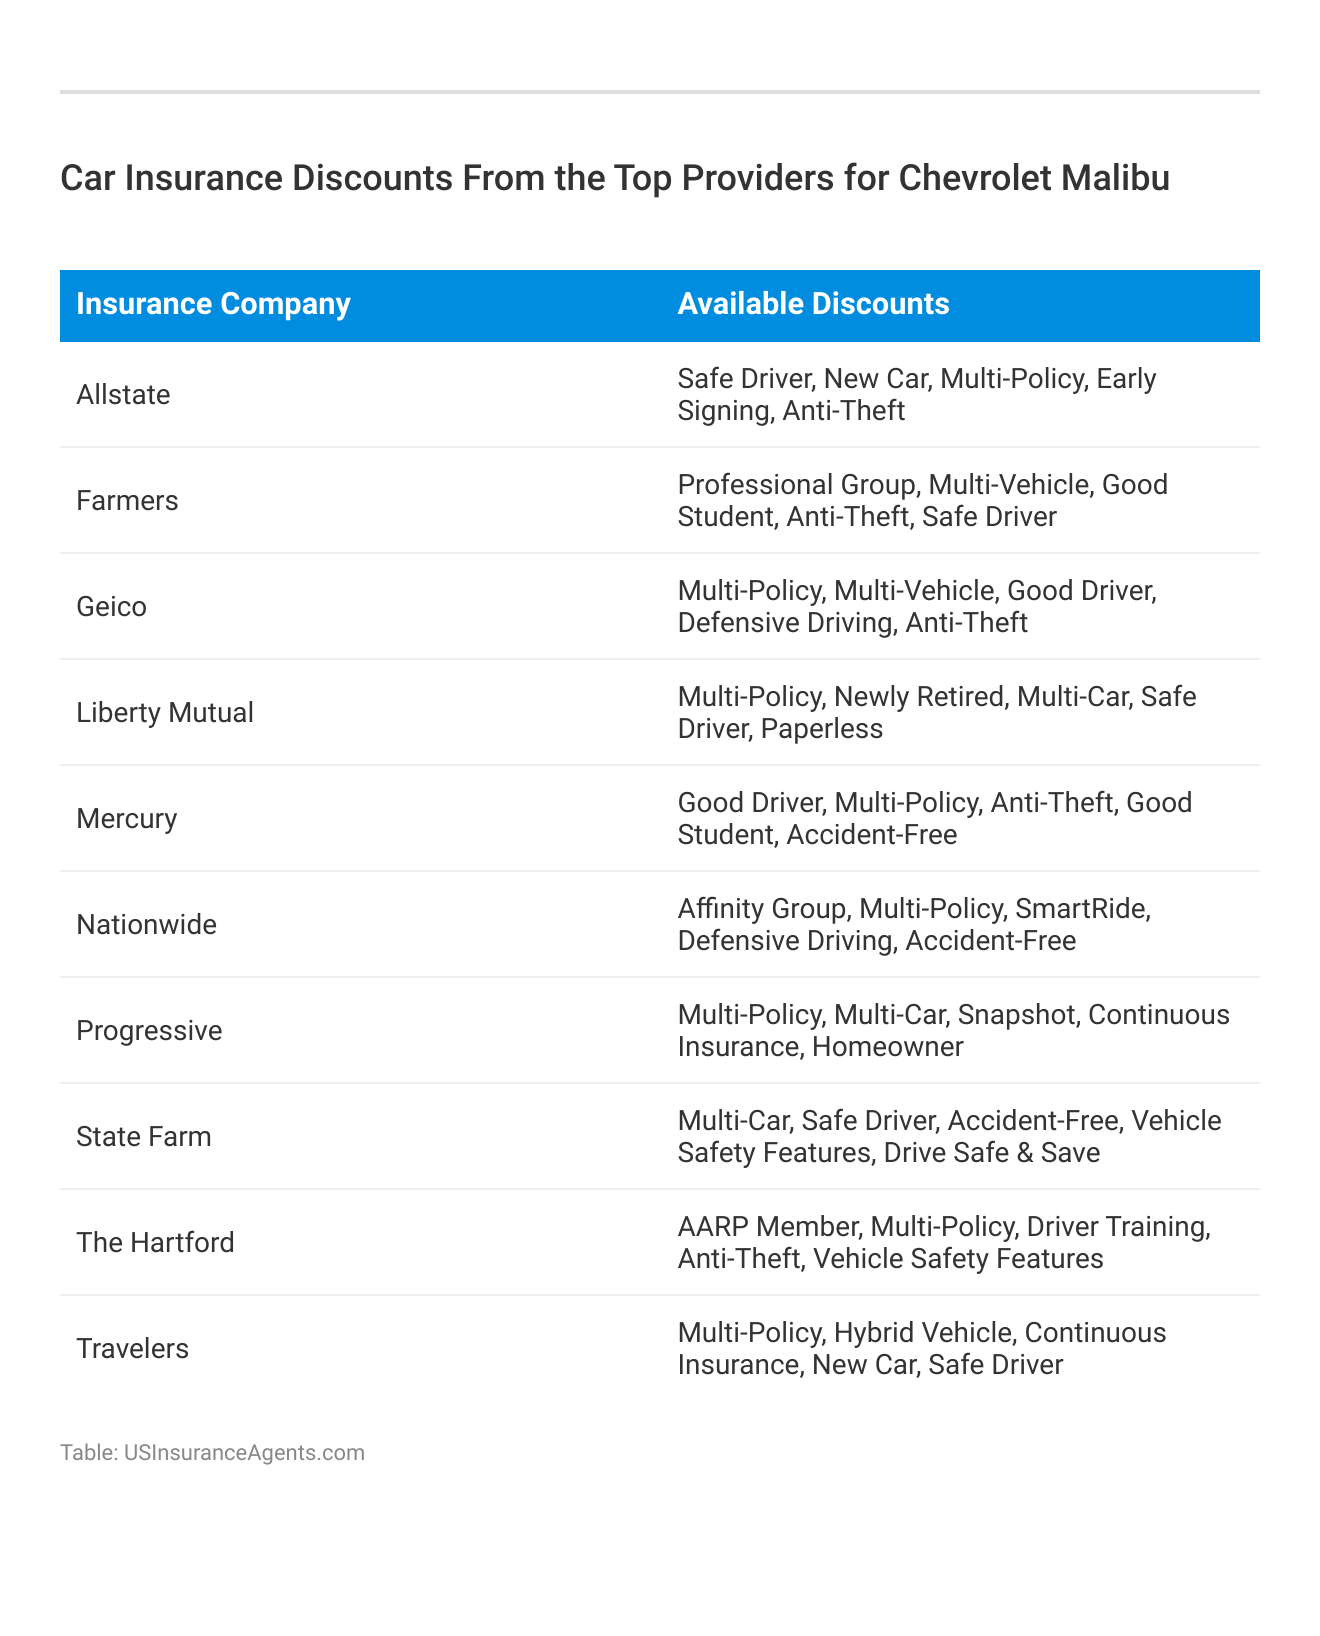 <h3>Car Insurance Discounts From the Top Providers for Chevrolet Malibu</h3>